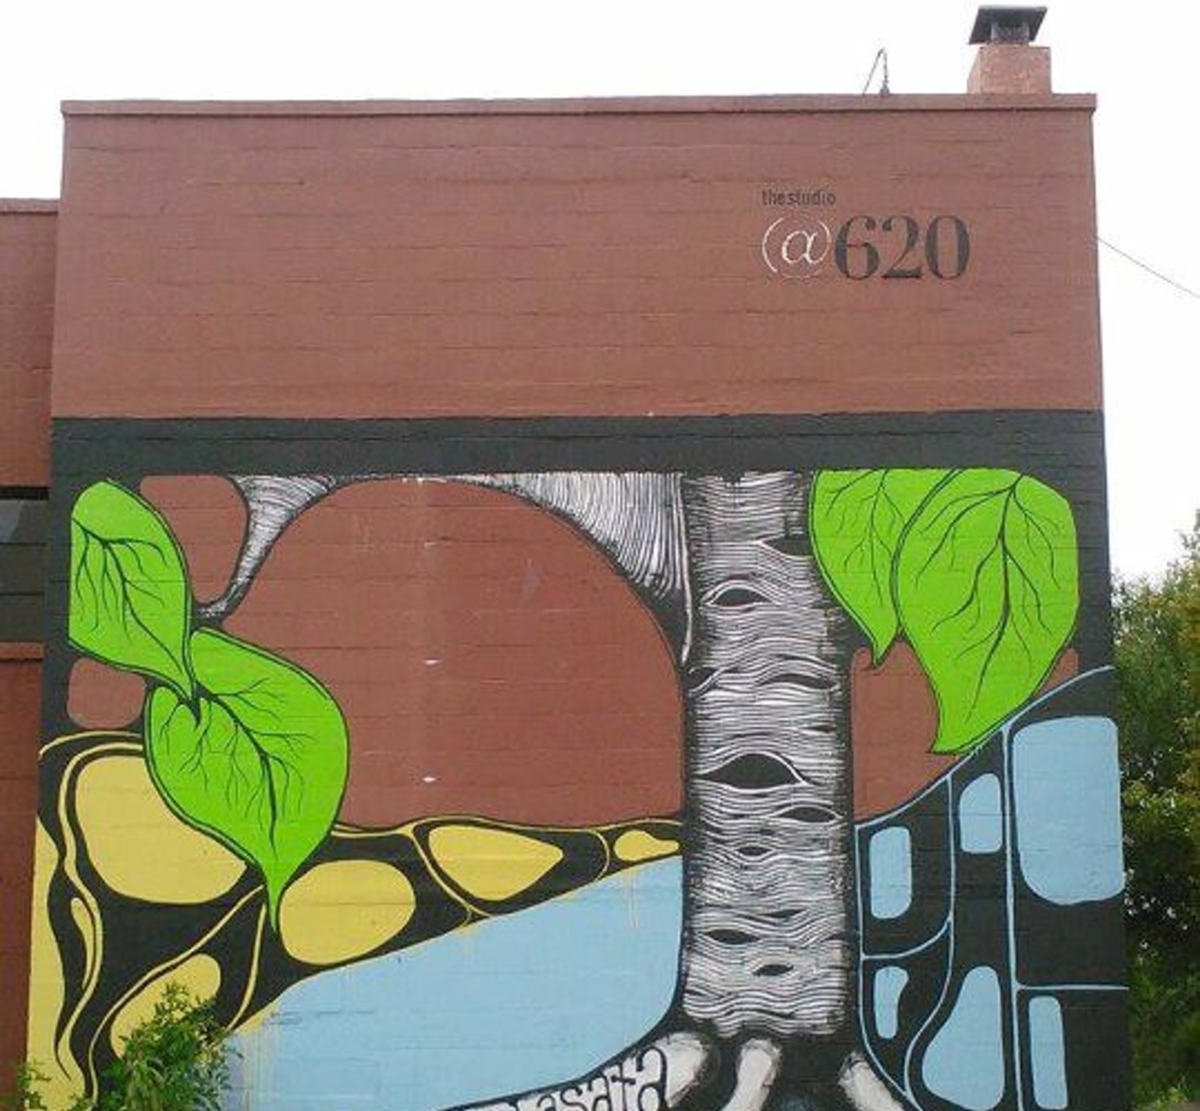 WALL-EYED: Dan Lasata painted the colorful, dreamlike mural on the exterior east wall of the Studio@620.